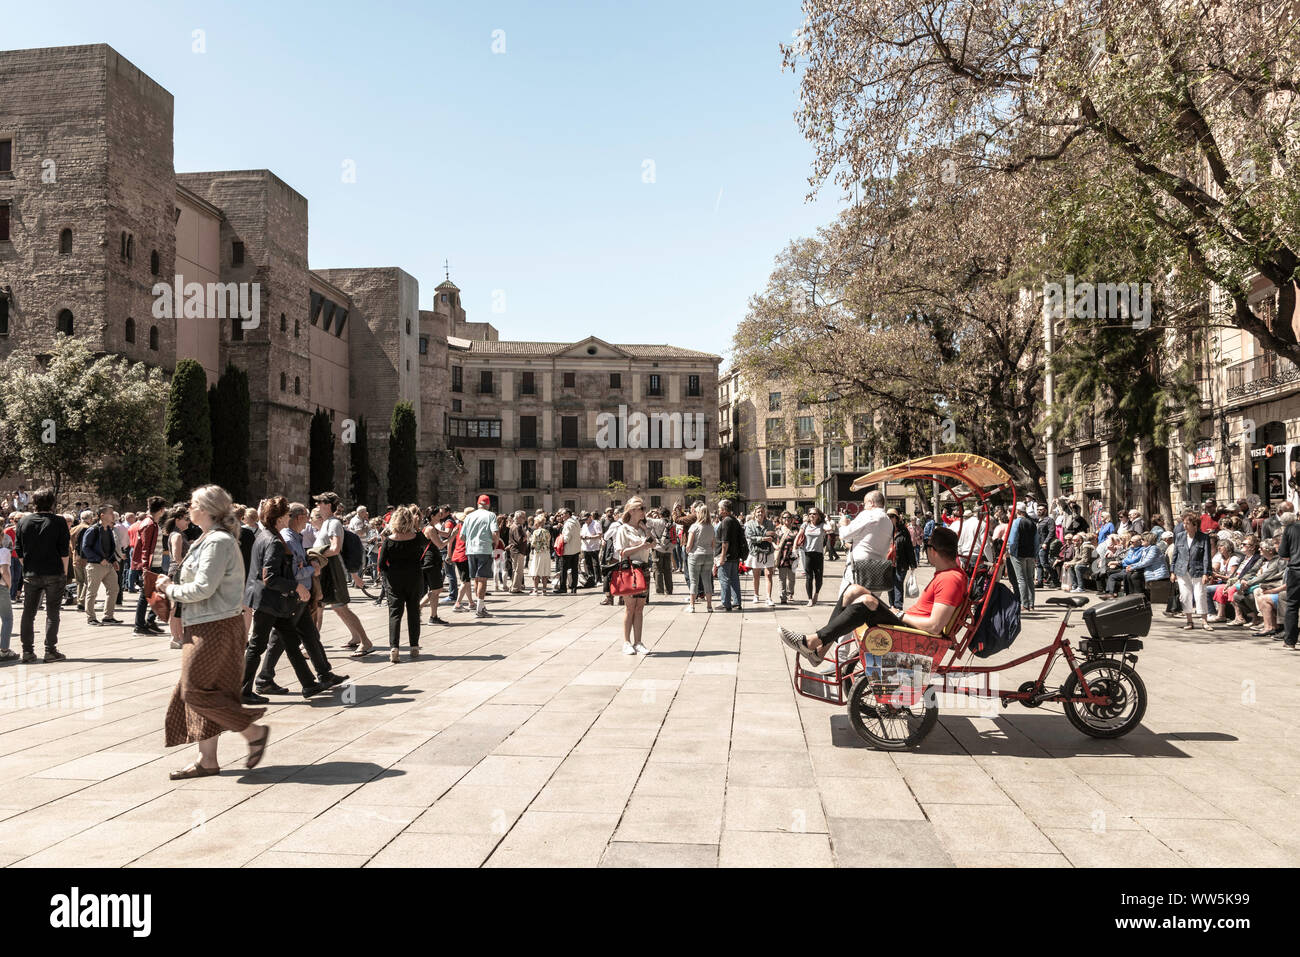 Authentic Imagery of real peoples lifestyle in everyday situations.  Having fun, on vacation, riding bikes, shopping, walking in Barcelona, Spain. Stock Photo